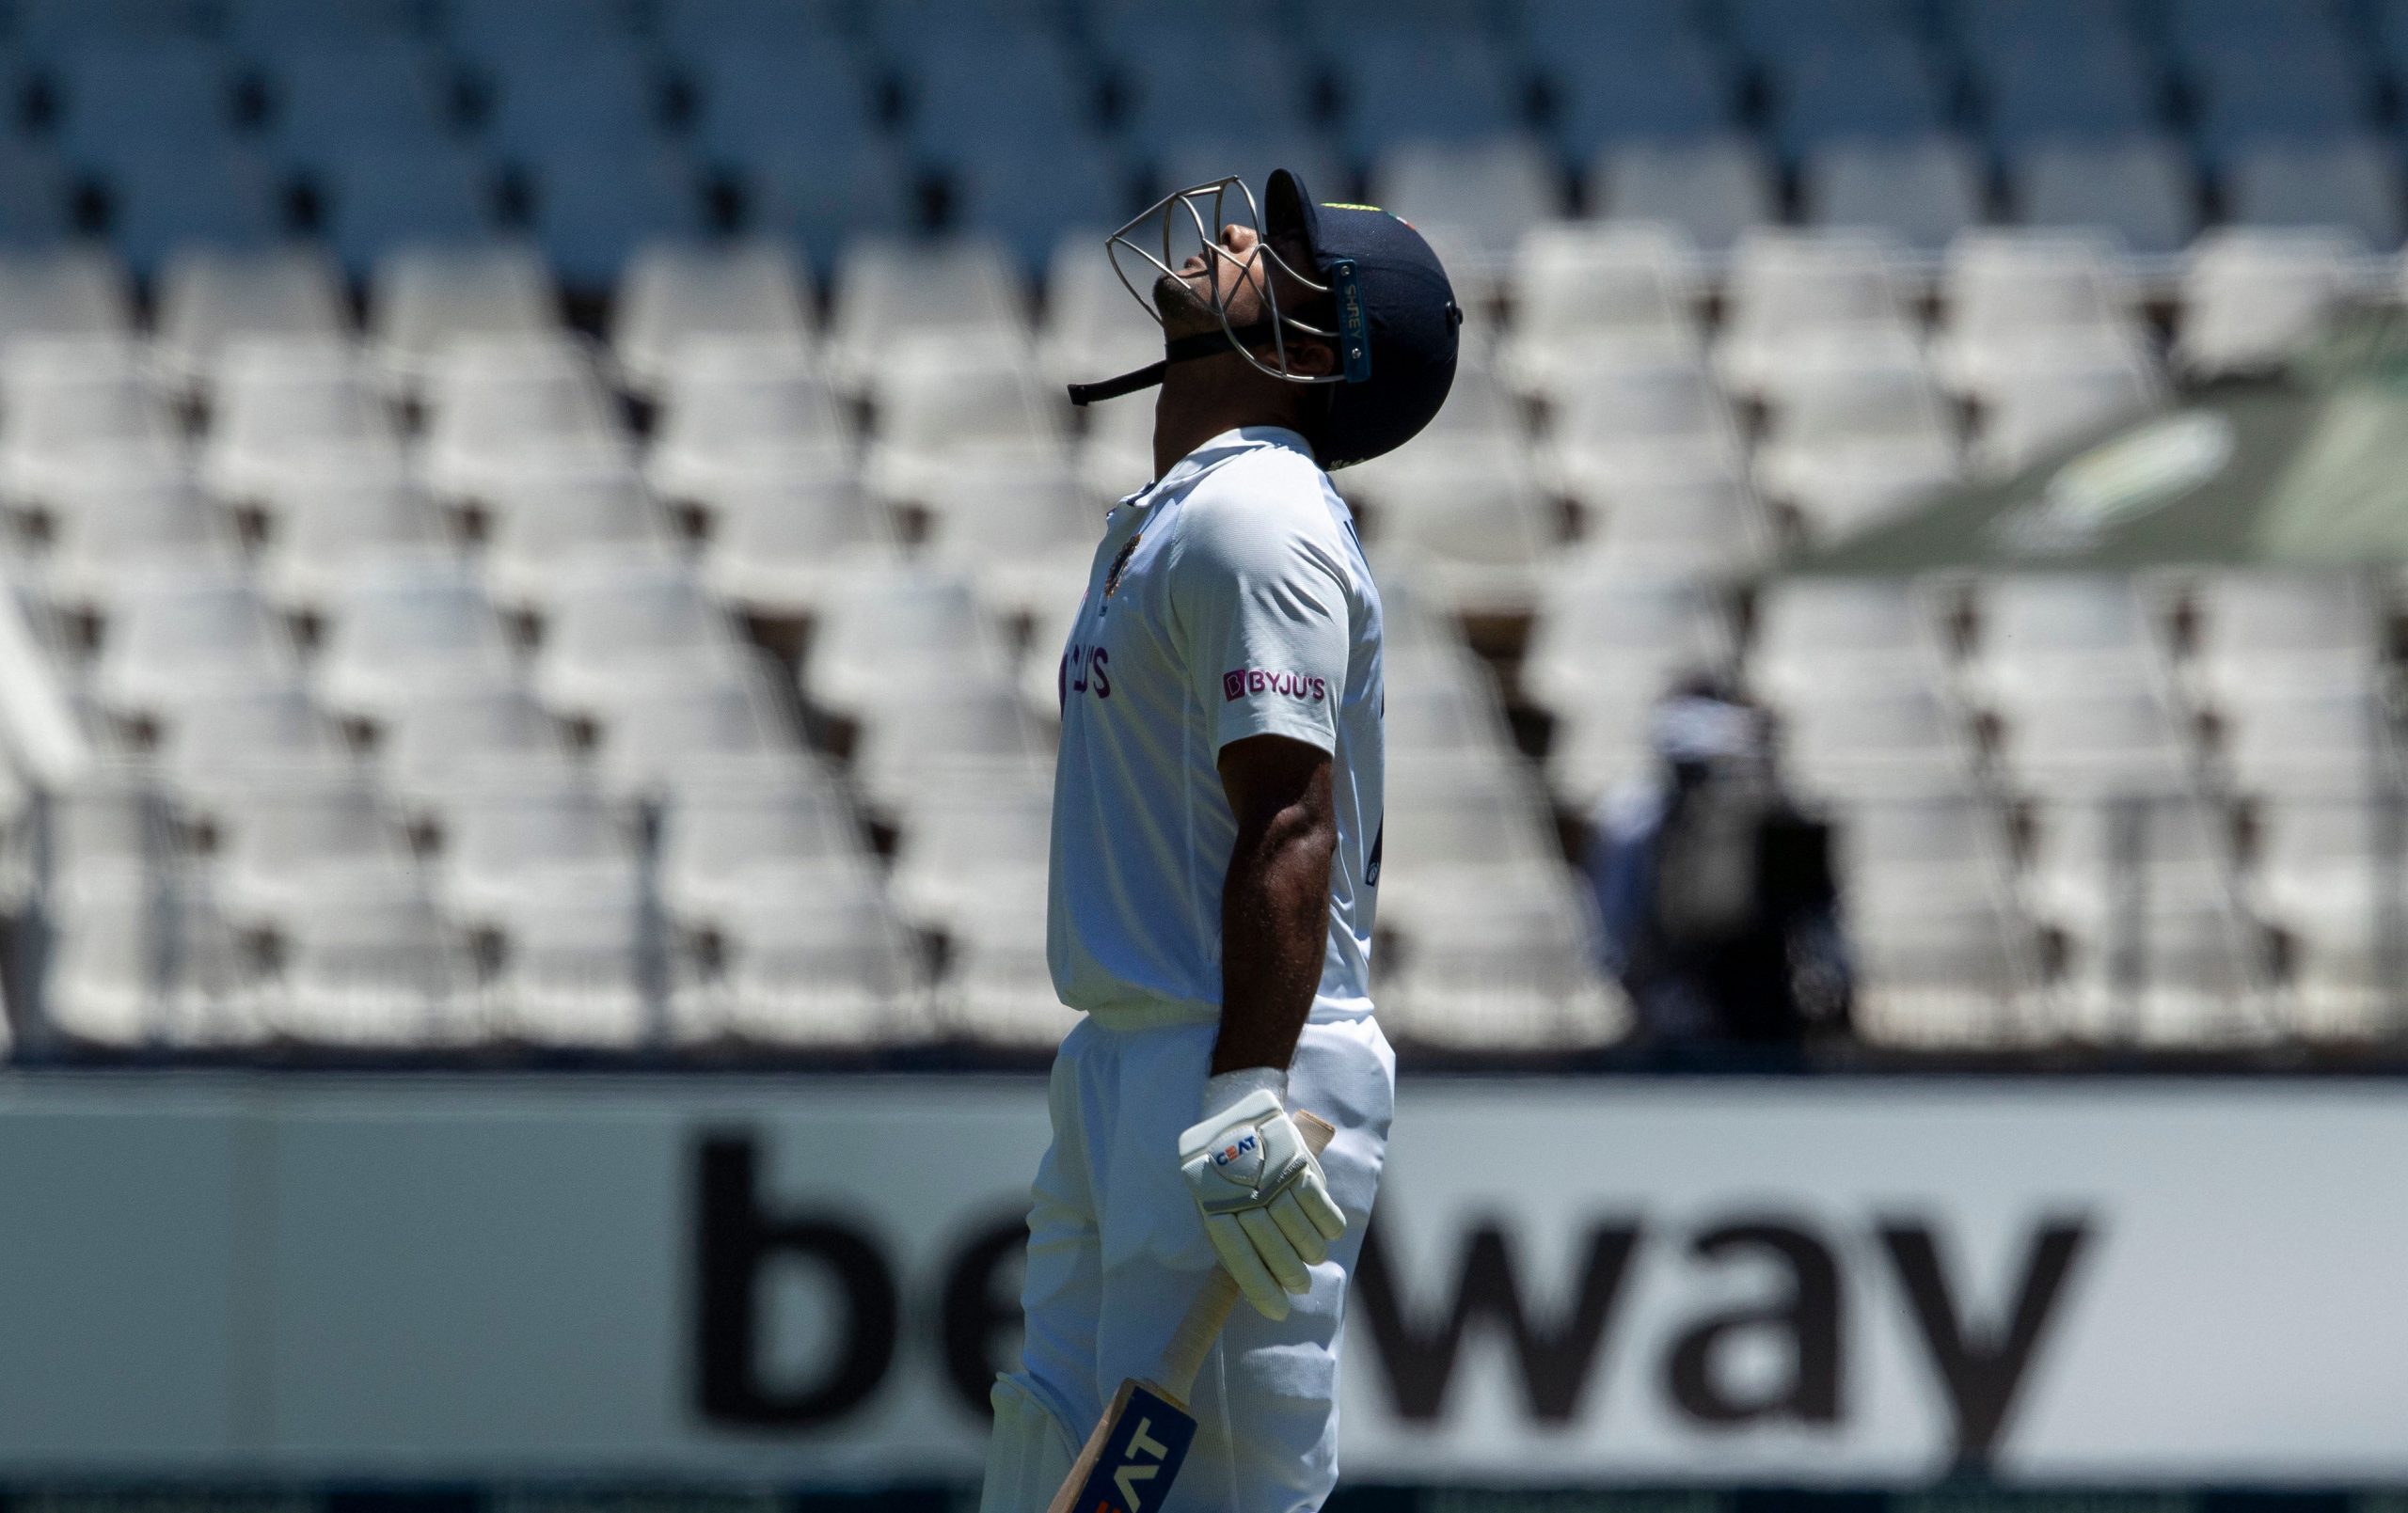 2nd Test, Day 2: India lead South Africa by 58 runs at stumps